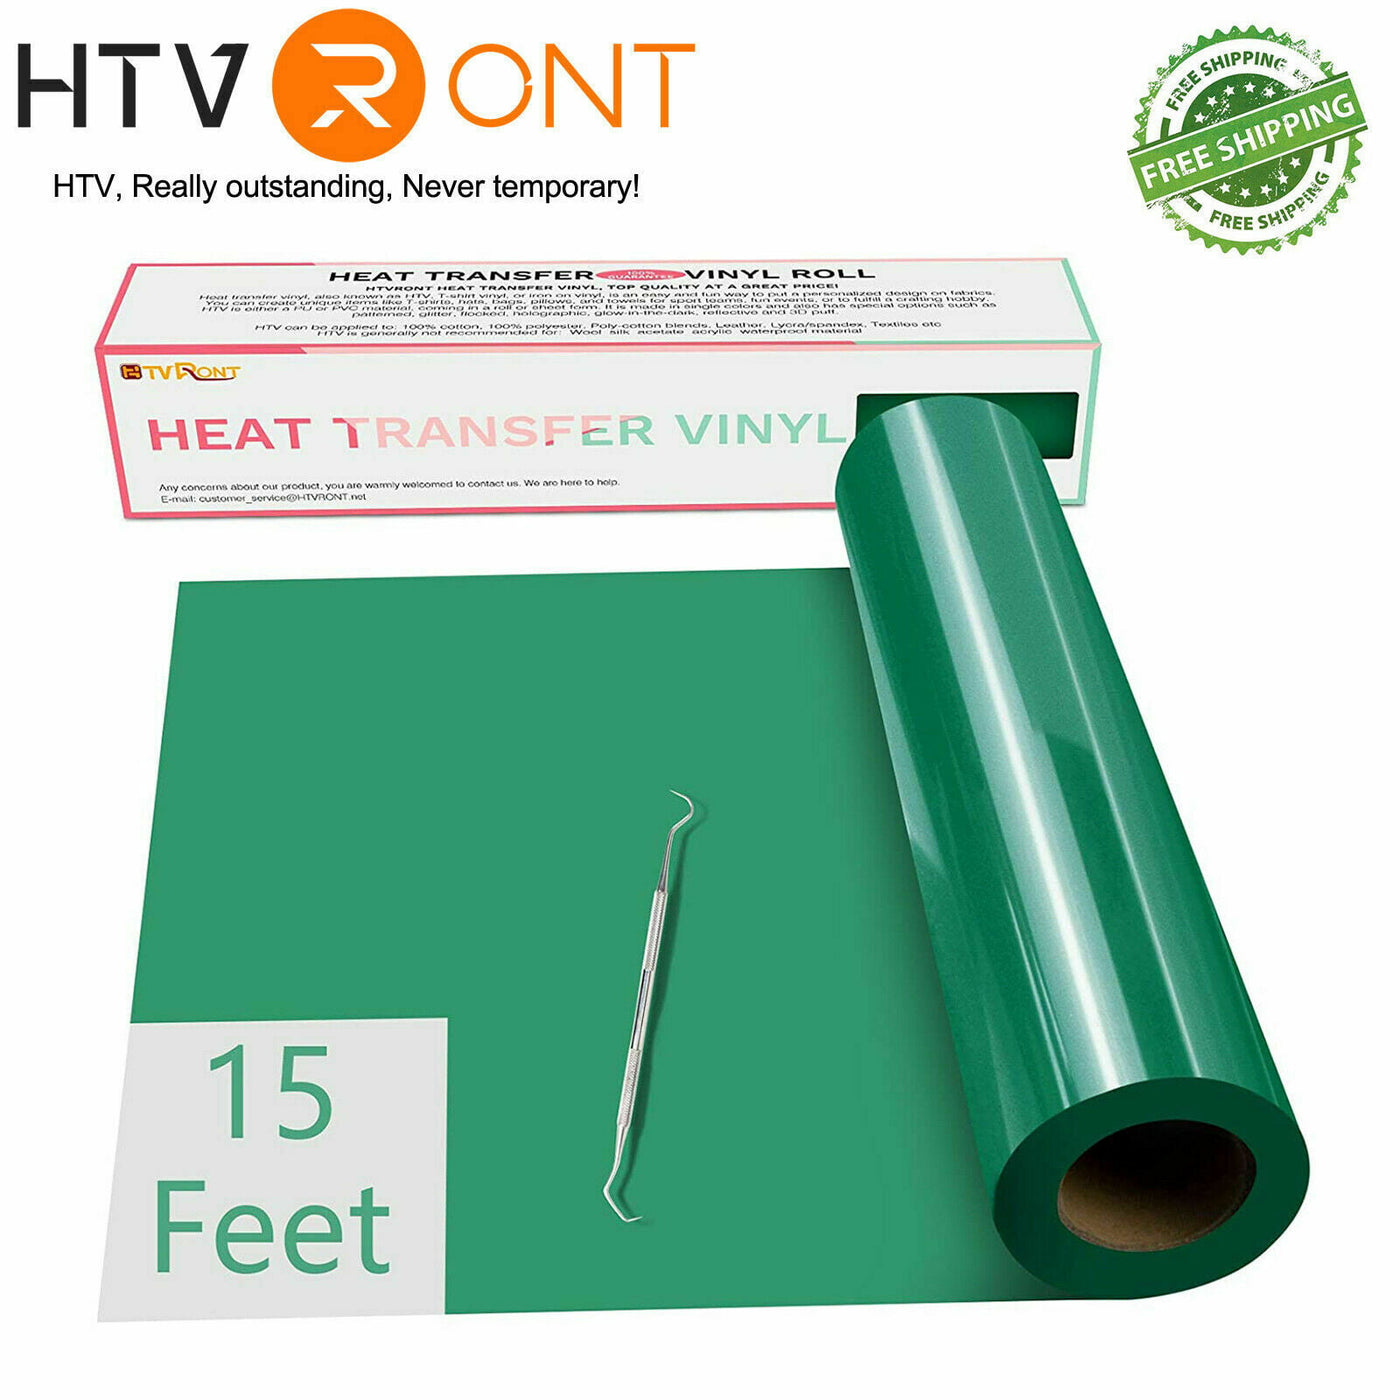 HTVRONT HTV Heat Transfer Vinyl-12 x 3FT Gold HTV Vinyl Roll for T-Shirts,  Iron on Vinyl for Cricut, Cameo & Heat Press Machine- Easy to Cut & Weed